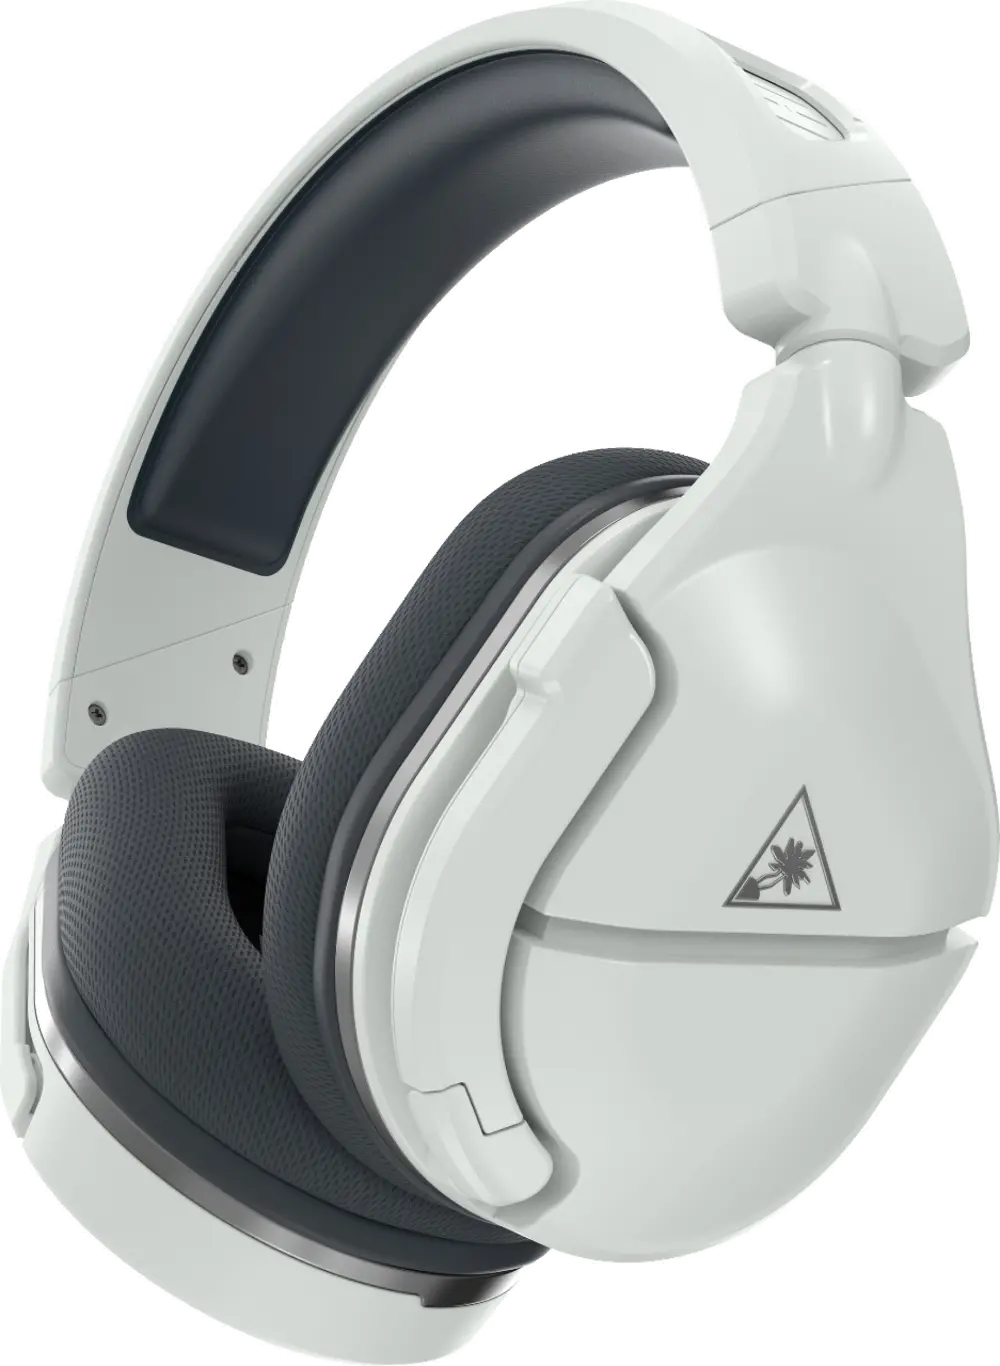 TBS/STEALTH_600-2XBW Turtle Beach Stealth 600 Gen 2 White Wireless Gaming Headset - Xbox One, Xbox Series X/S-1